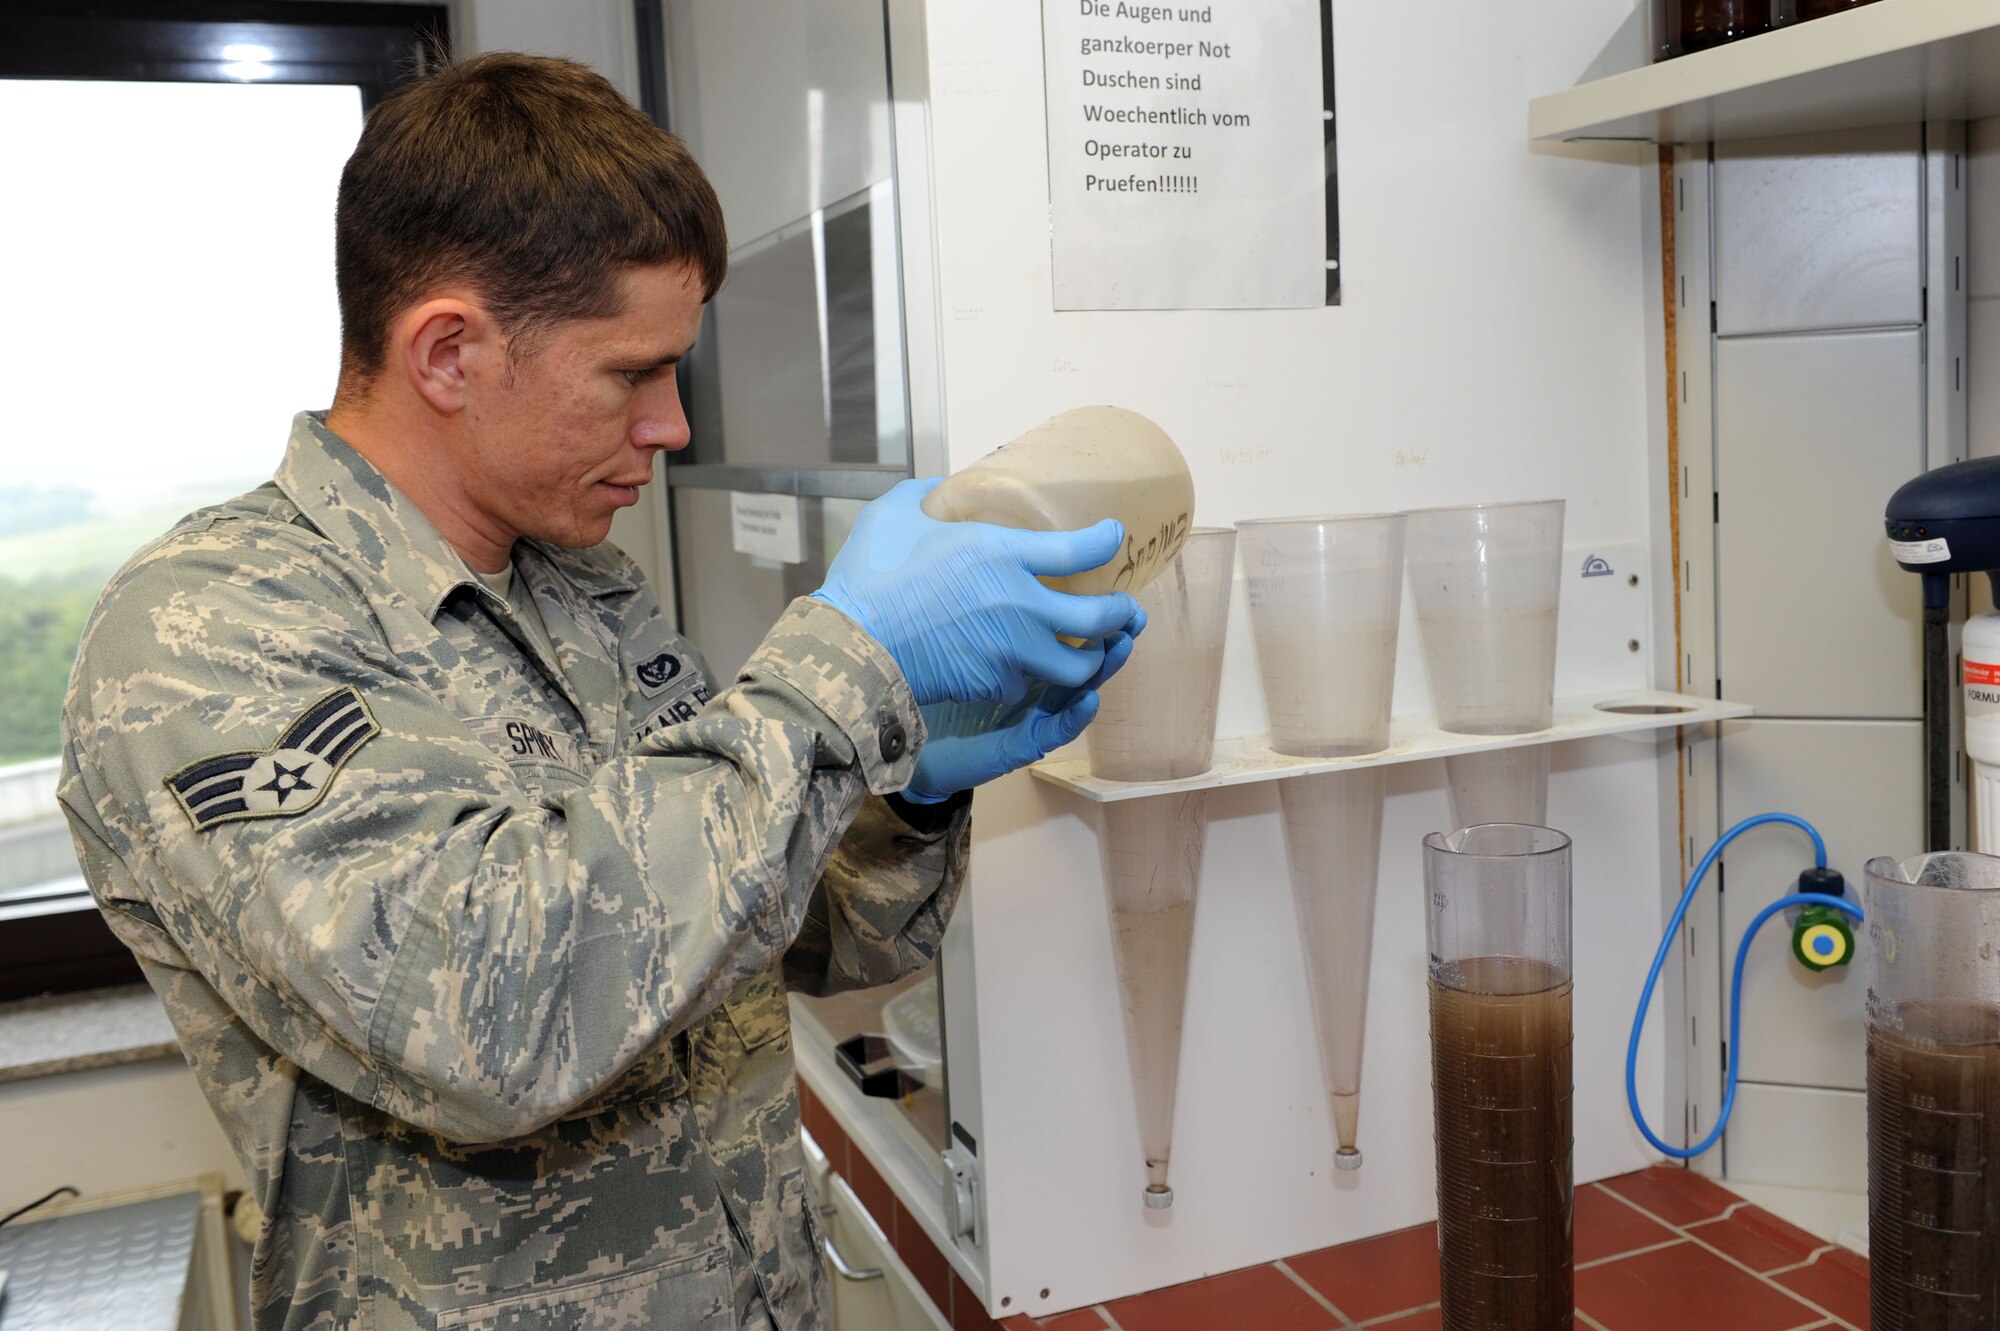 SPANGDAHLEM AIR BASE, Germany –Senior Airman David Spivey, 52nd Civil Engineer Squadron water and fuels system maintenance technician, conducts a sediment test at the wastewater treatment facility here Sept. 5. This test is conducted to ensure the excess non-soluble material is sifted out prior to the water treatment. Samples are taken daily from every stage of the treatment process to ensure they meet German environmental standards. The facility processes wastewater from the base to remove any hazardous chemicals it may contain before it is released back into the environment. (U.S. Air Force photo by Senior Airman Christopher Toon/Released)